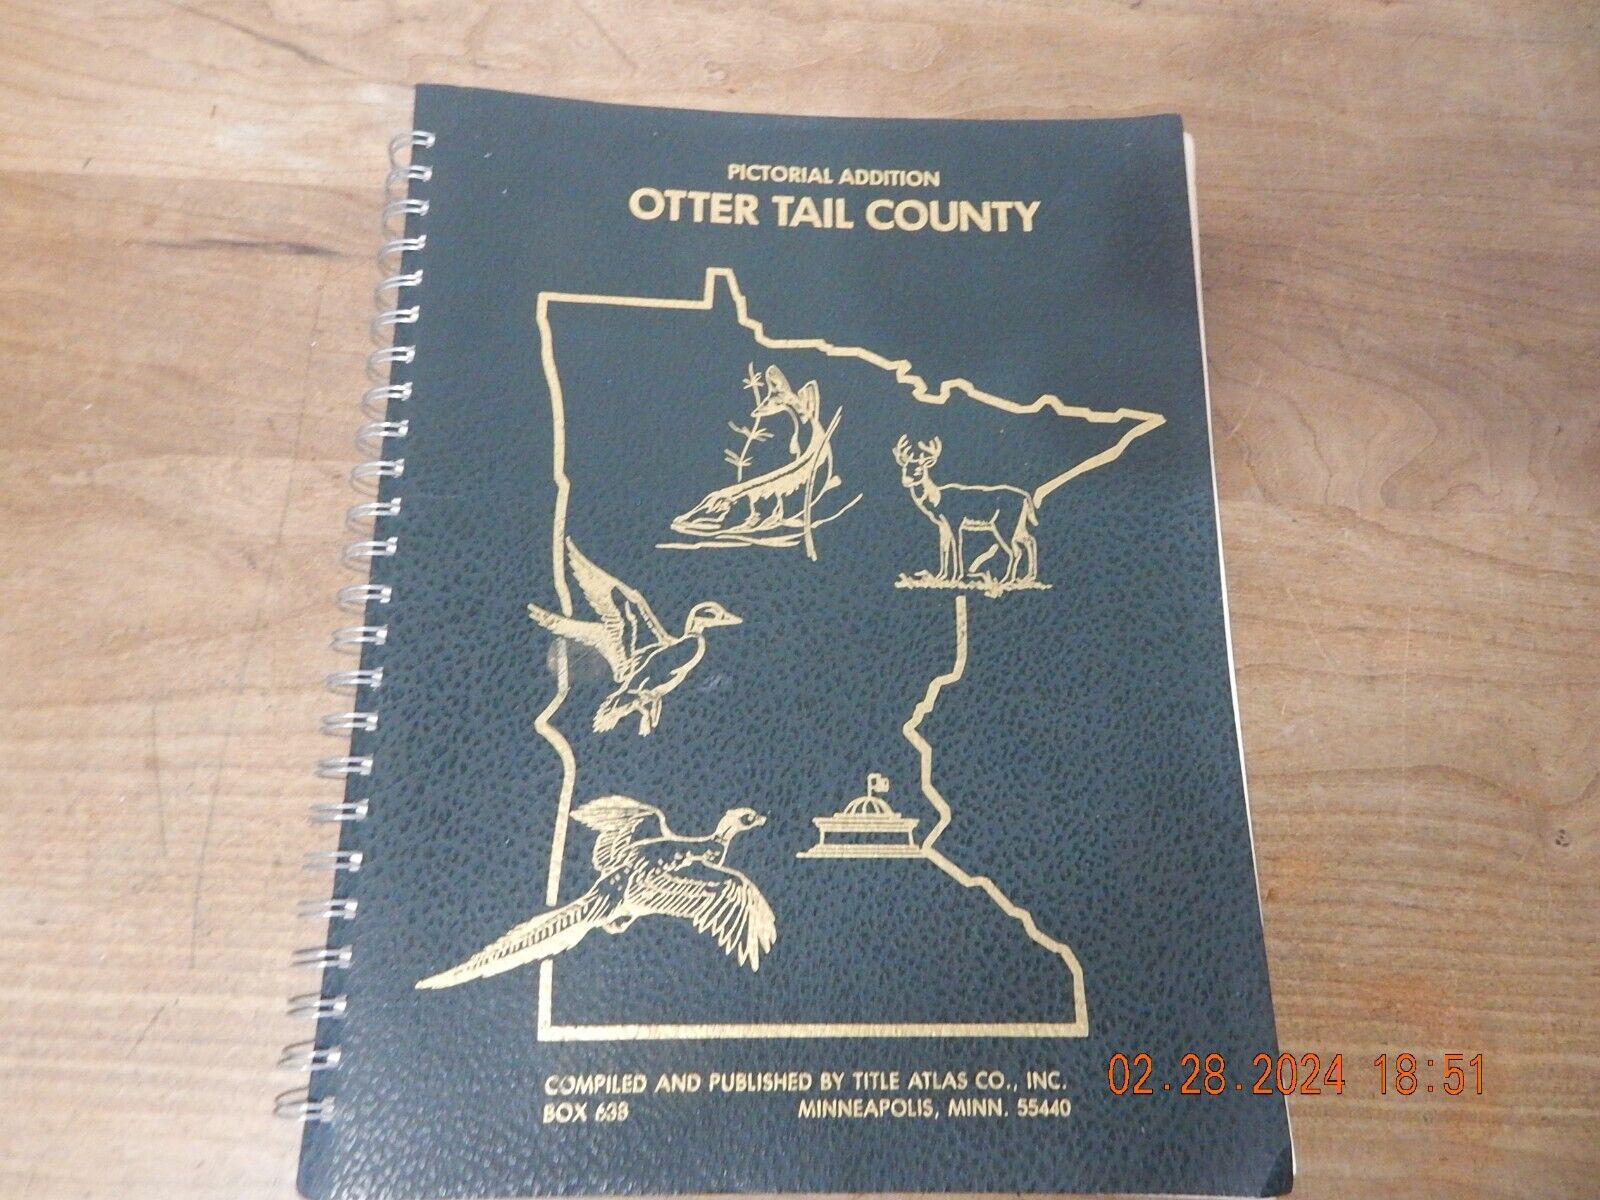 TITLE ATLAS BOOK PICTORIAL ATLAS MINNESOTA COUNTY OTTER TAIL 1980\